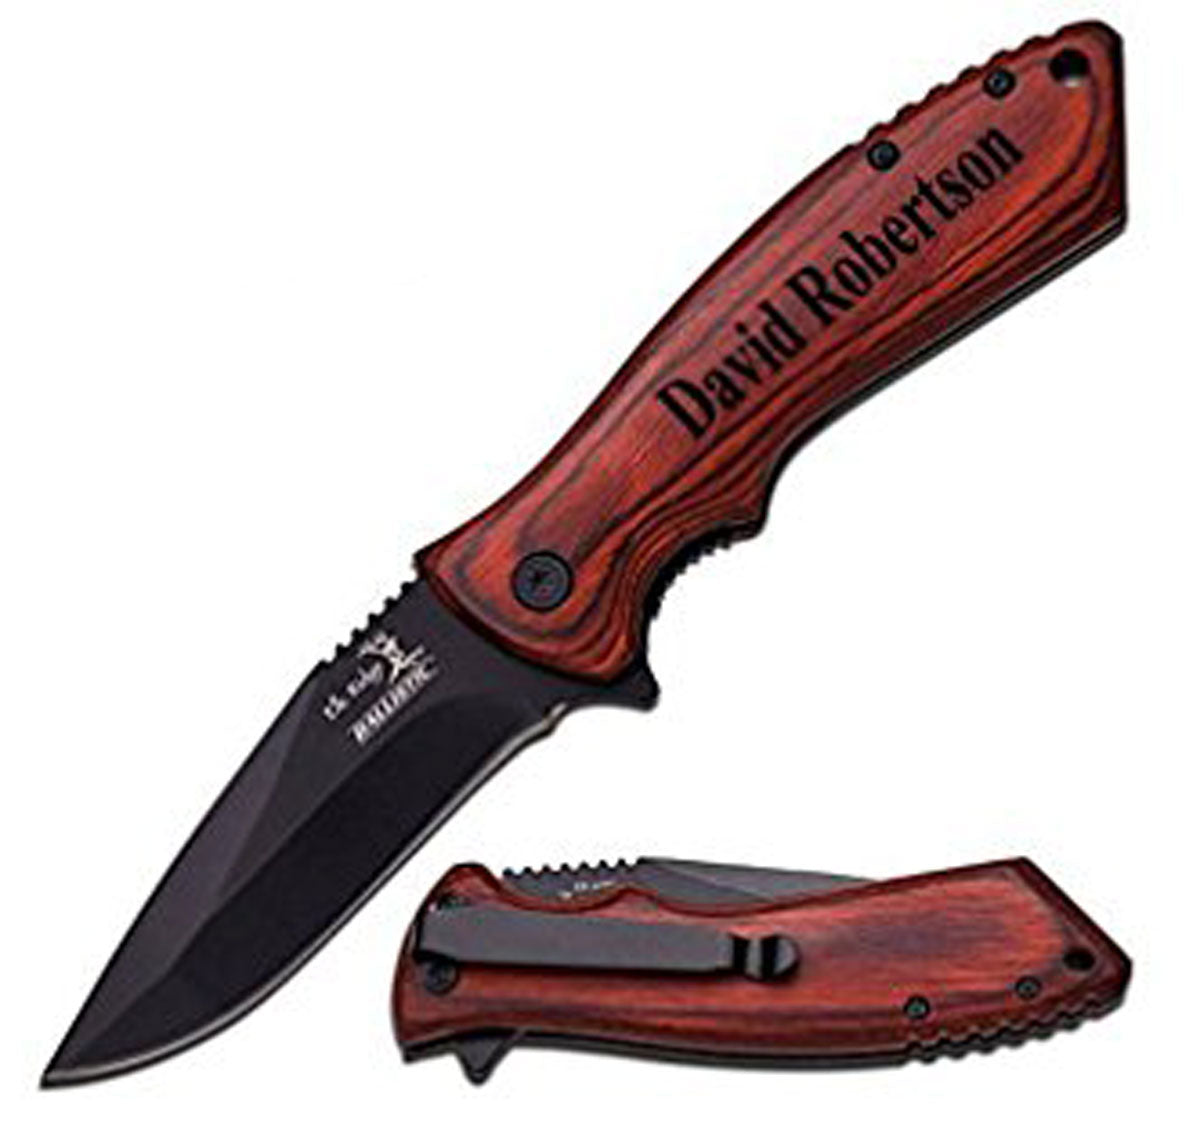 GIFTS INFINITY Personalized Laser Engraved Pocket Folding Tactical Knife 4.5" Closed, Survival, Hunting Knife with Wooden Handle